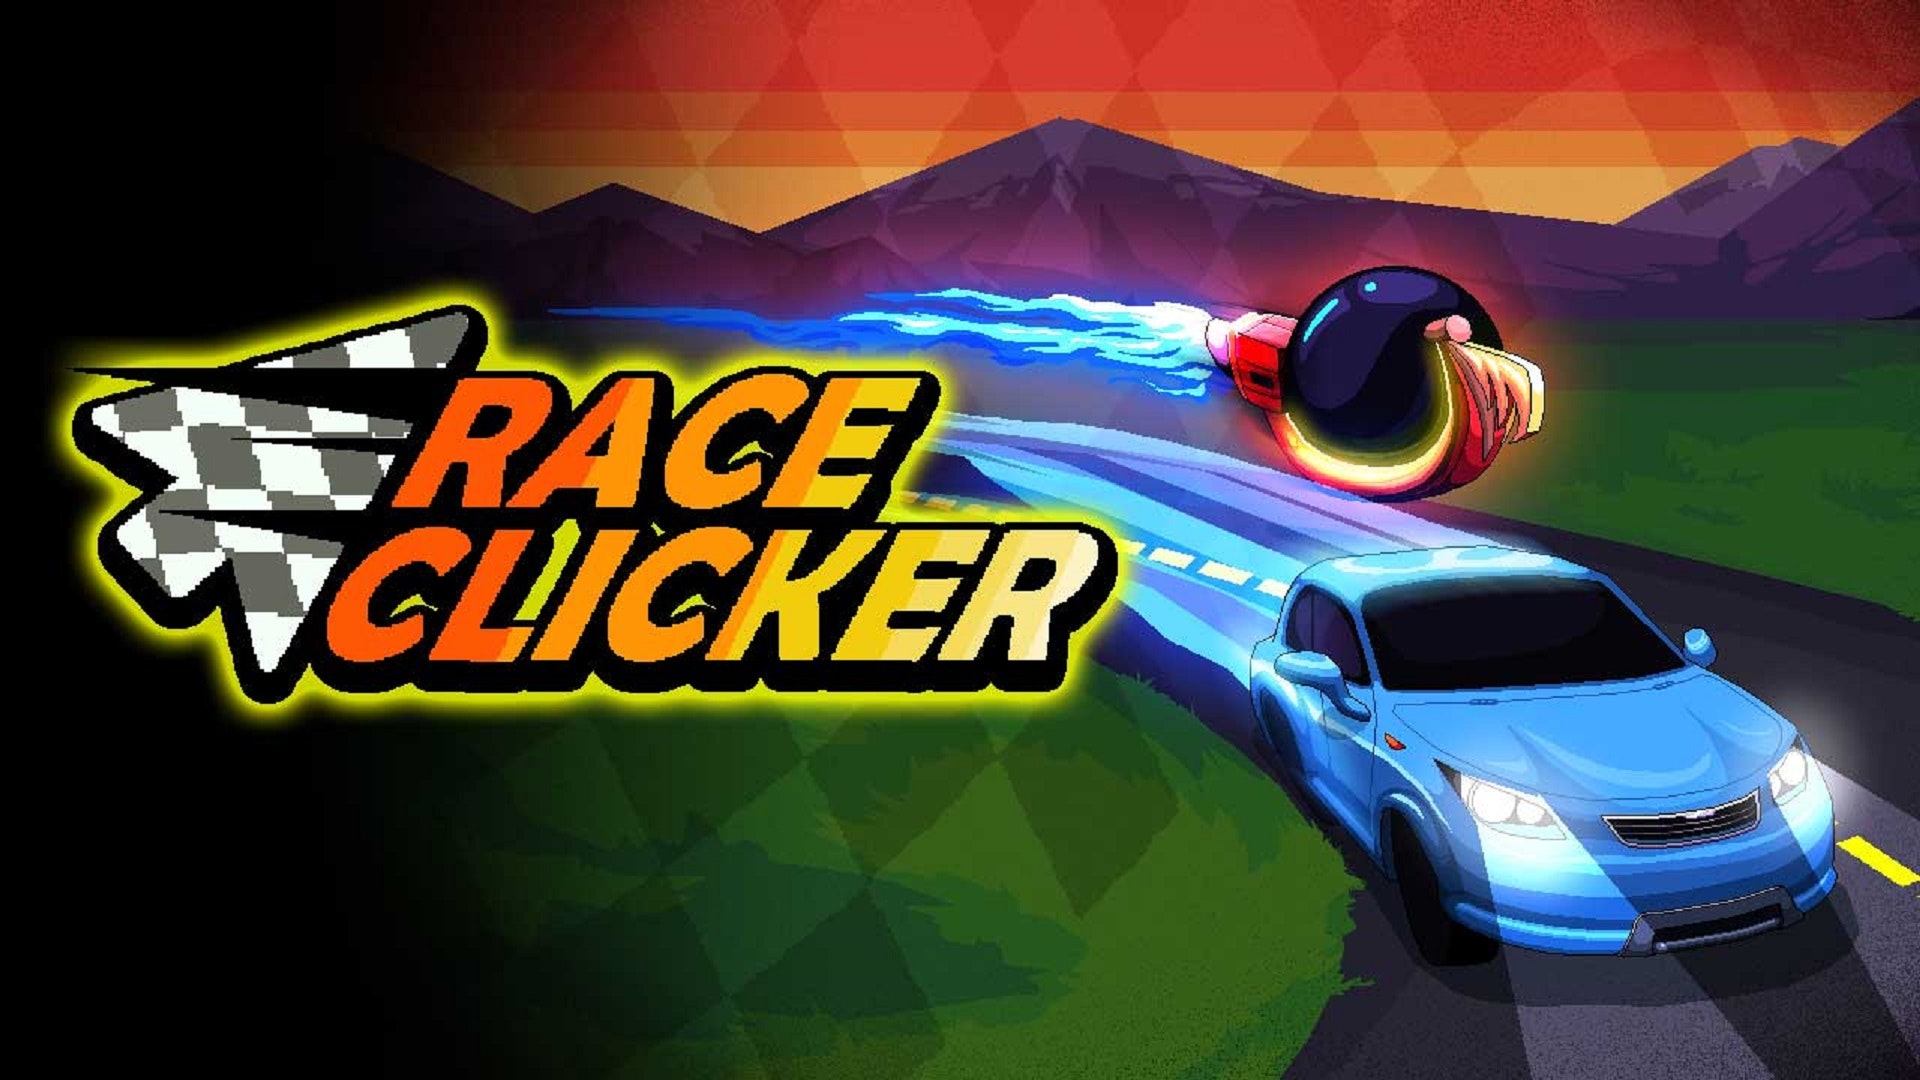 buying racer x in race clicker sorry for not posting #raceclicker